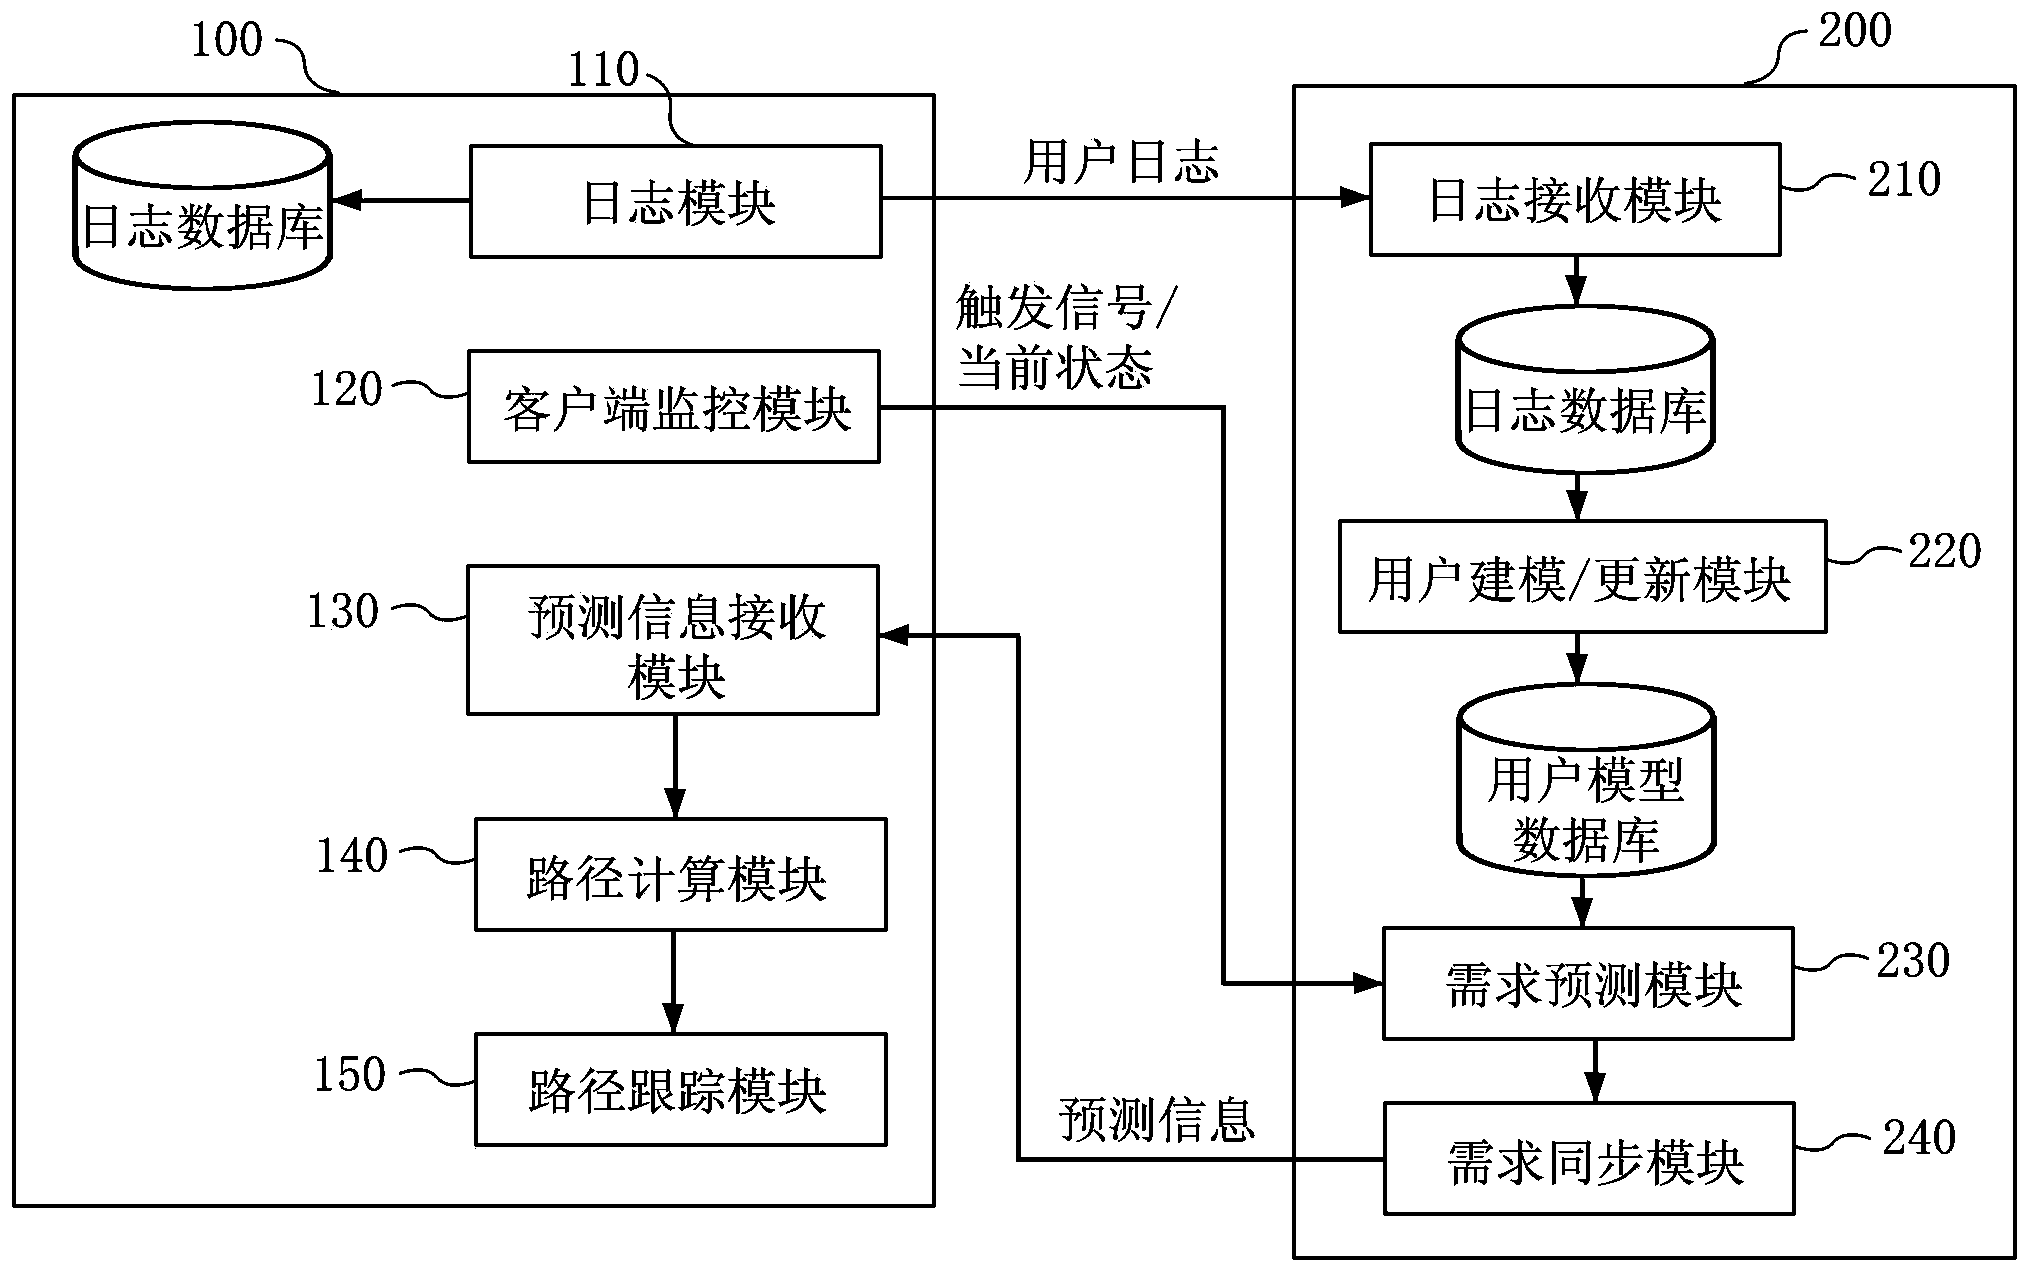 Route guide system and method based on user modeling